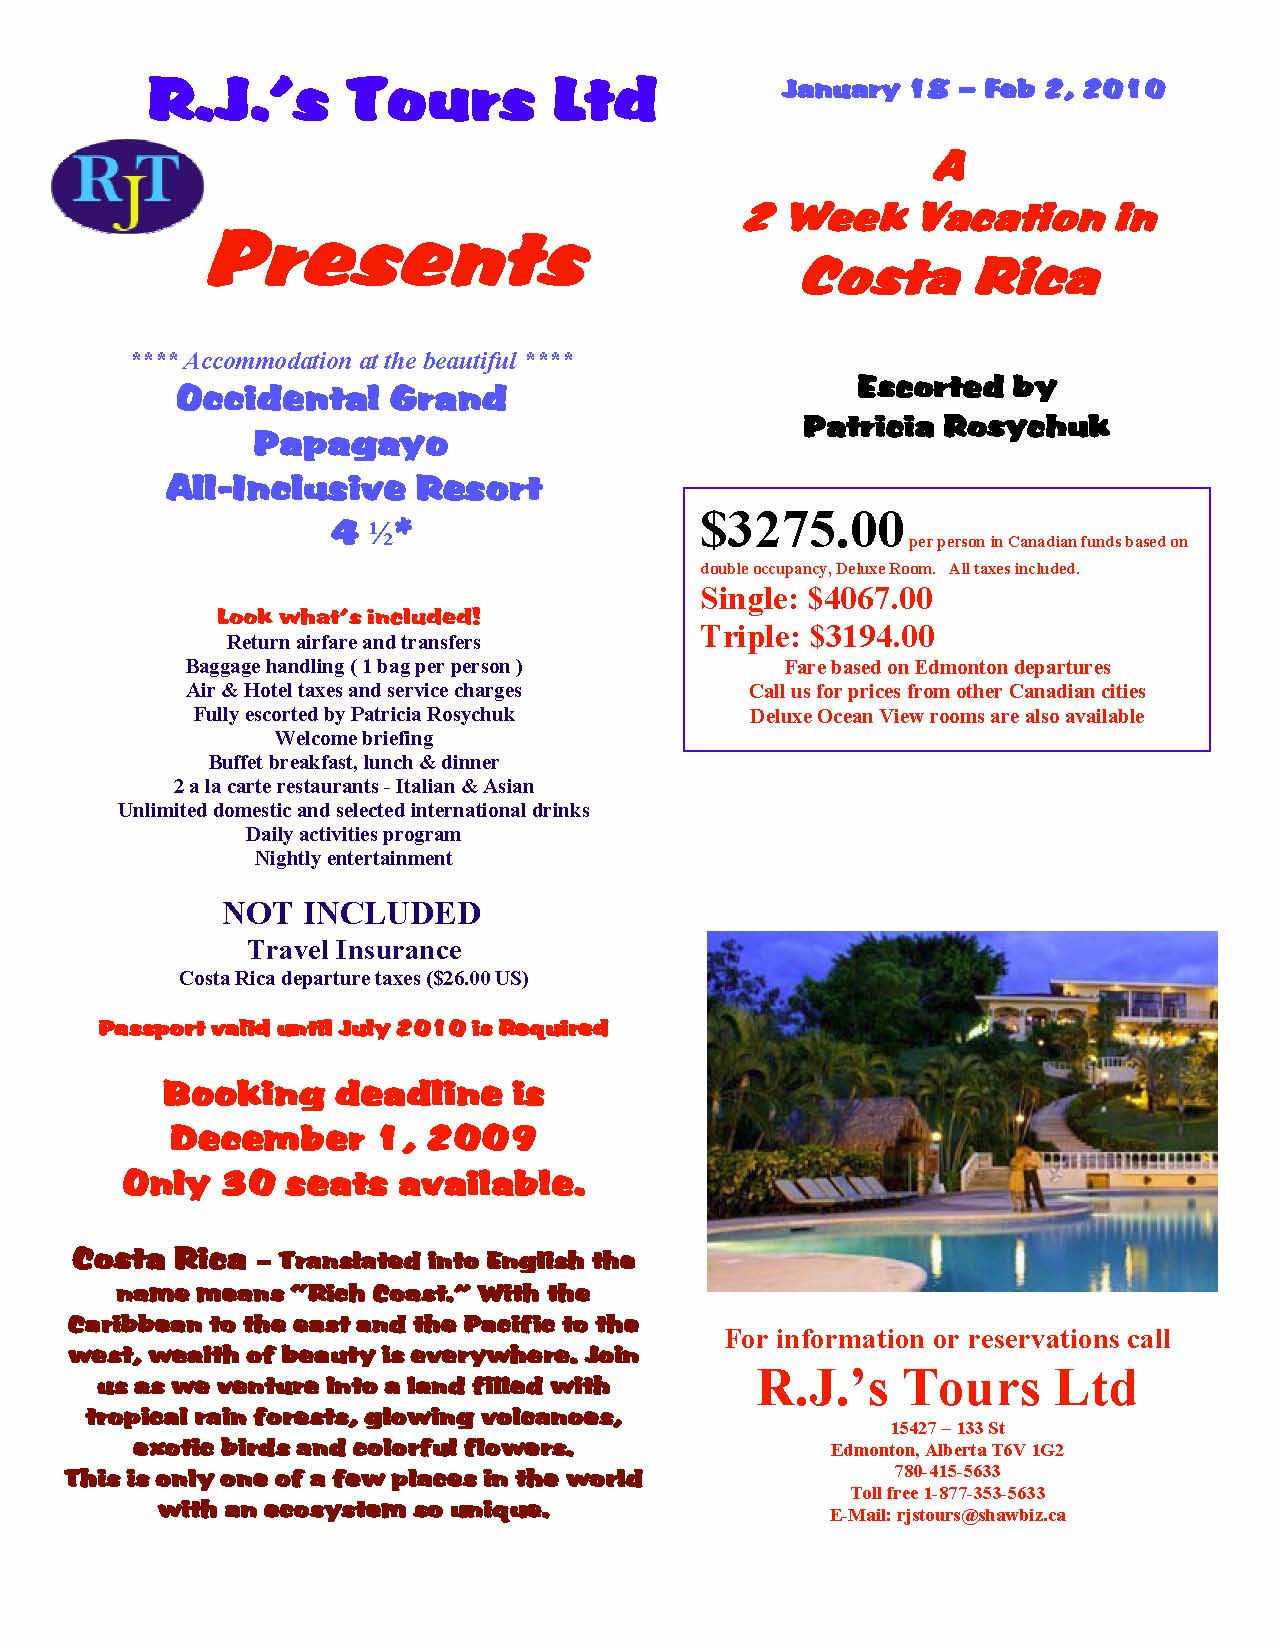 All-inclusive escorted group tour